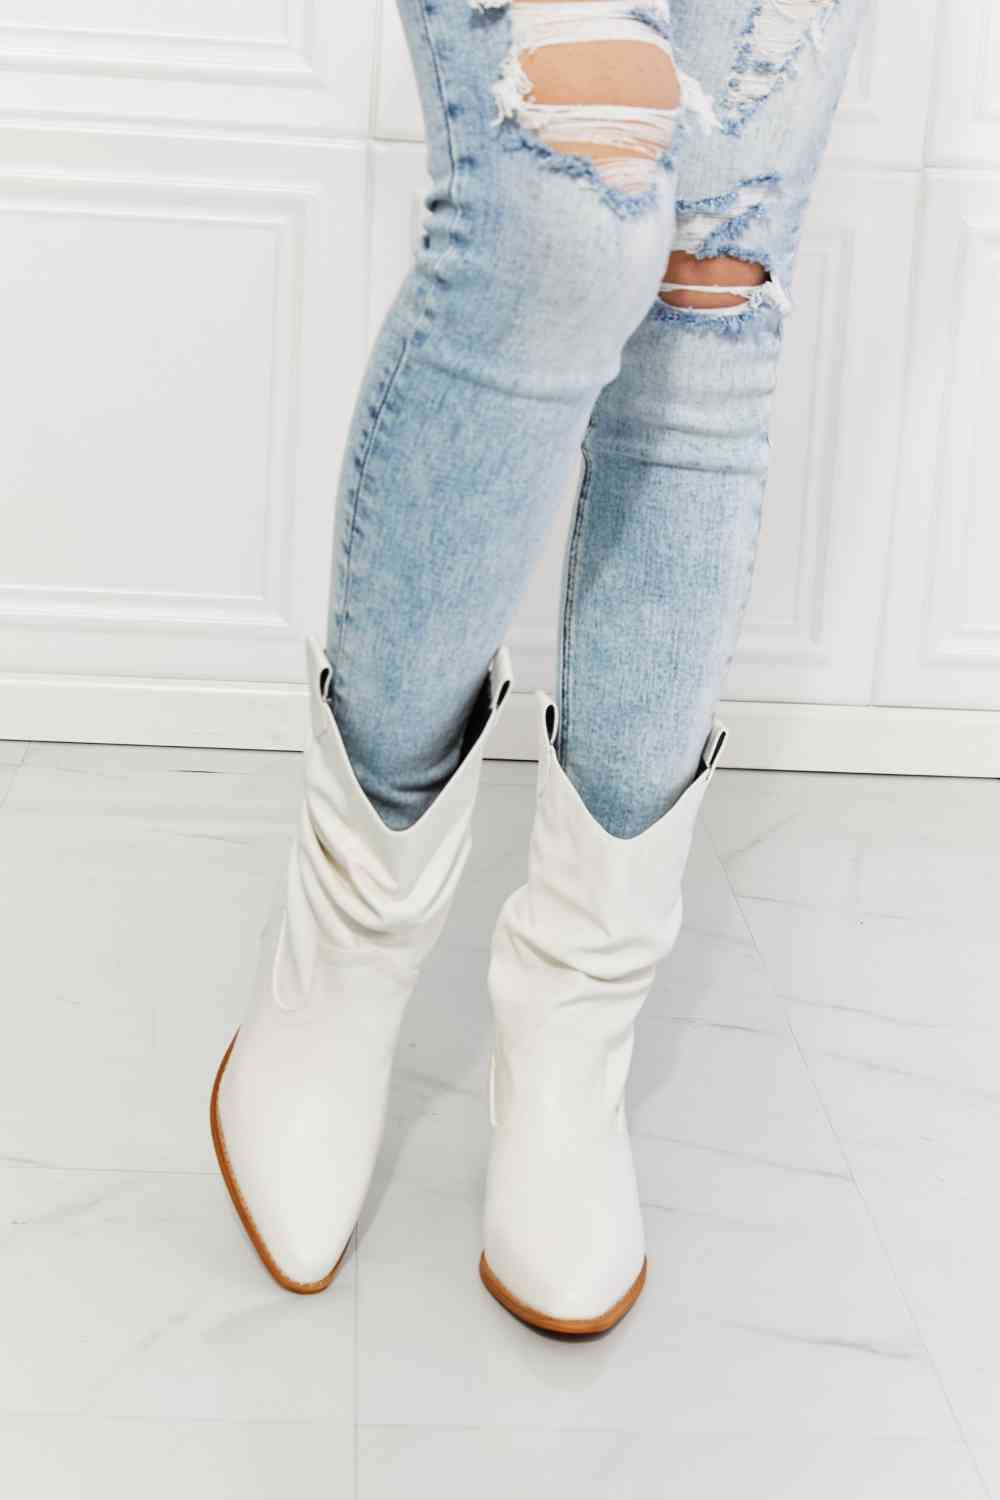 Stylish women's cowboy boots, Trendy cowgirl boots for women, Fashionable Western-style boots, Modern women's cowboy booties, Chic cowboy boots for fashion